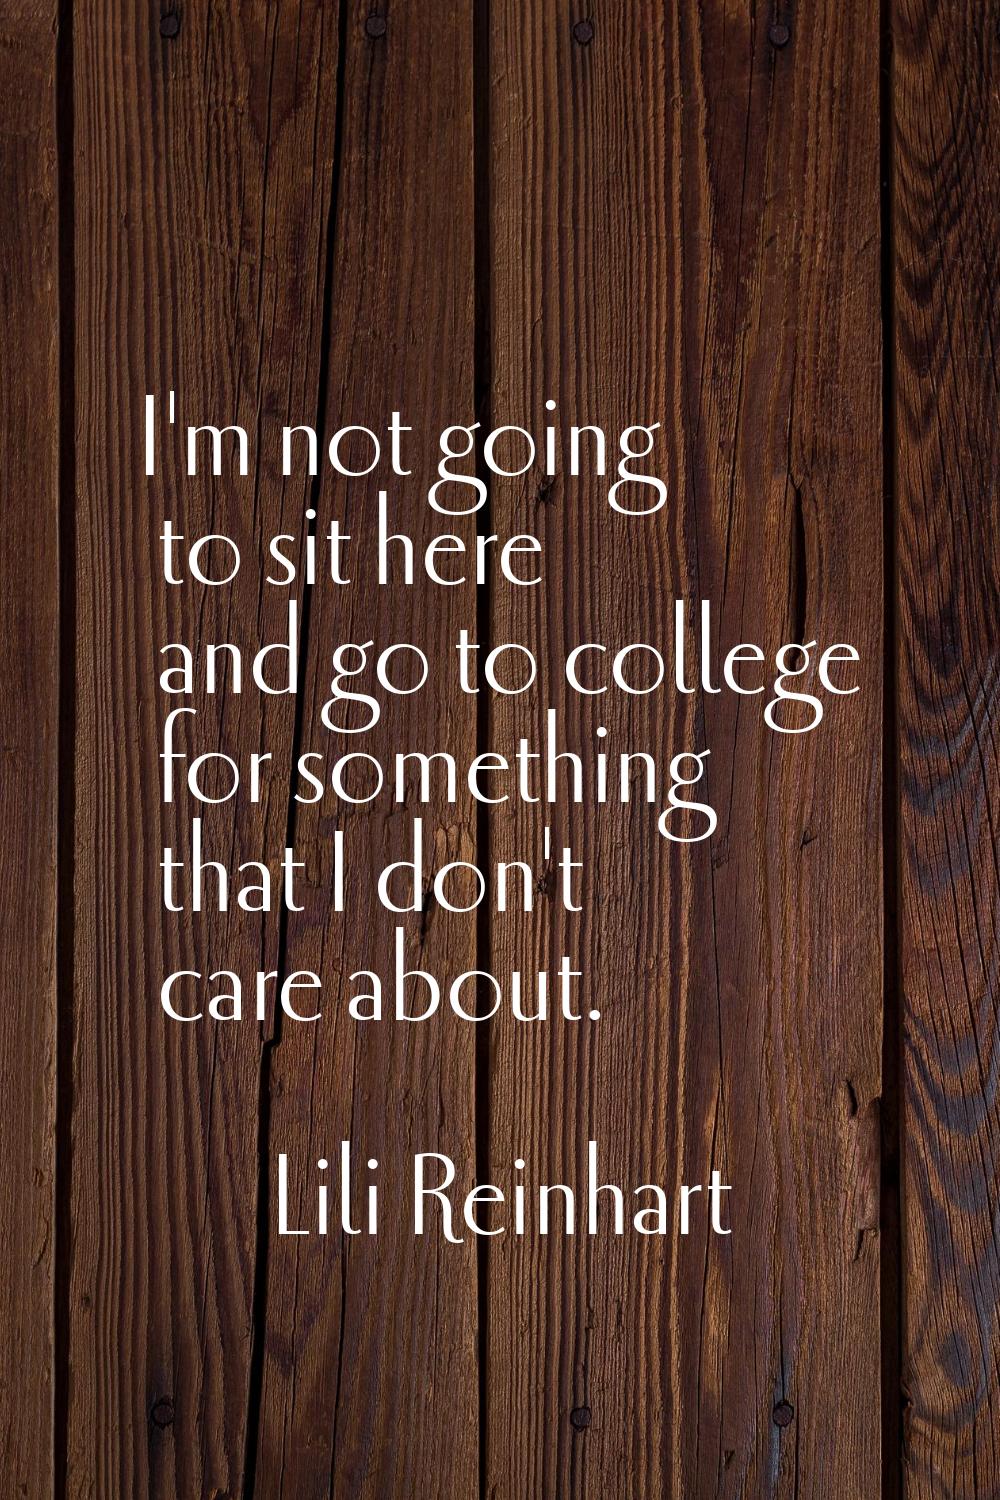 I'm not going to sit here and go to college for something that I don't care about.